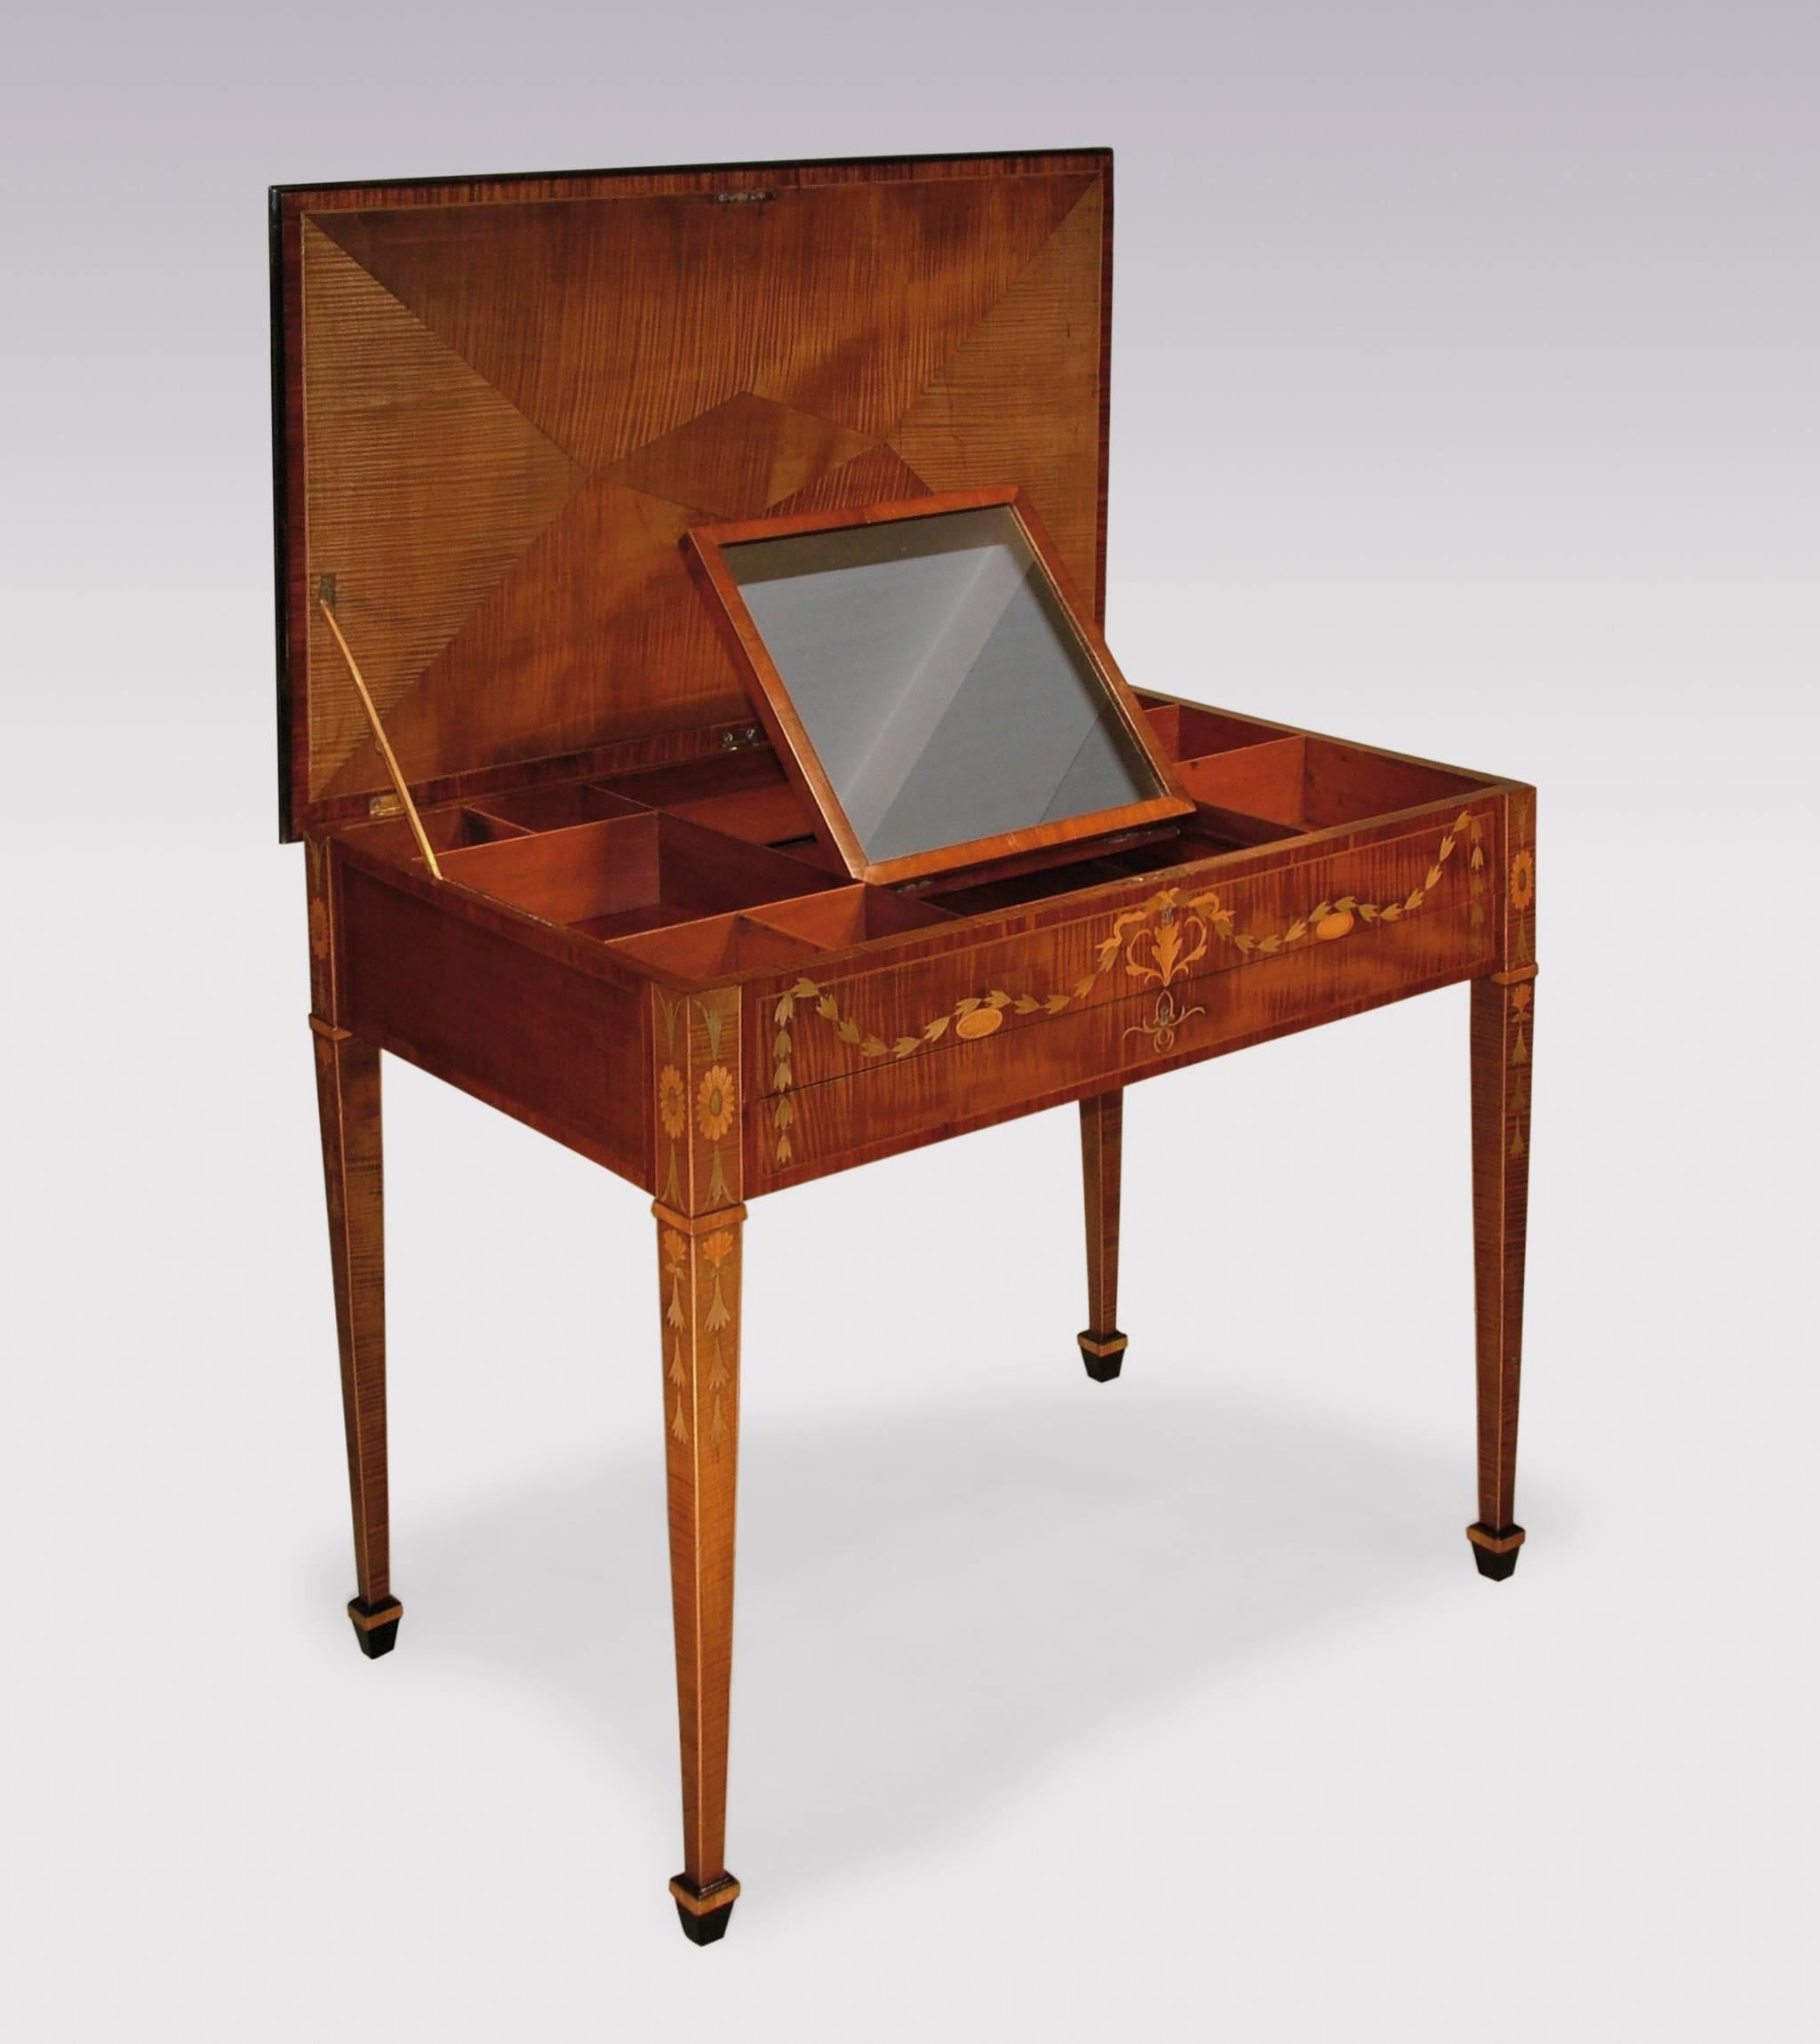 A fine and rare late 18th century harewood dressing table, after designs by Mayhew and Ince, boxwood and ebony strung throughout, having crossbanded mitred top with pen work leaf bordered central padouk wood oval panel and fan inlay to the corners.